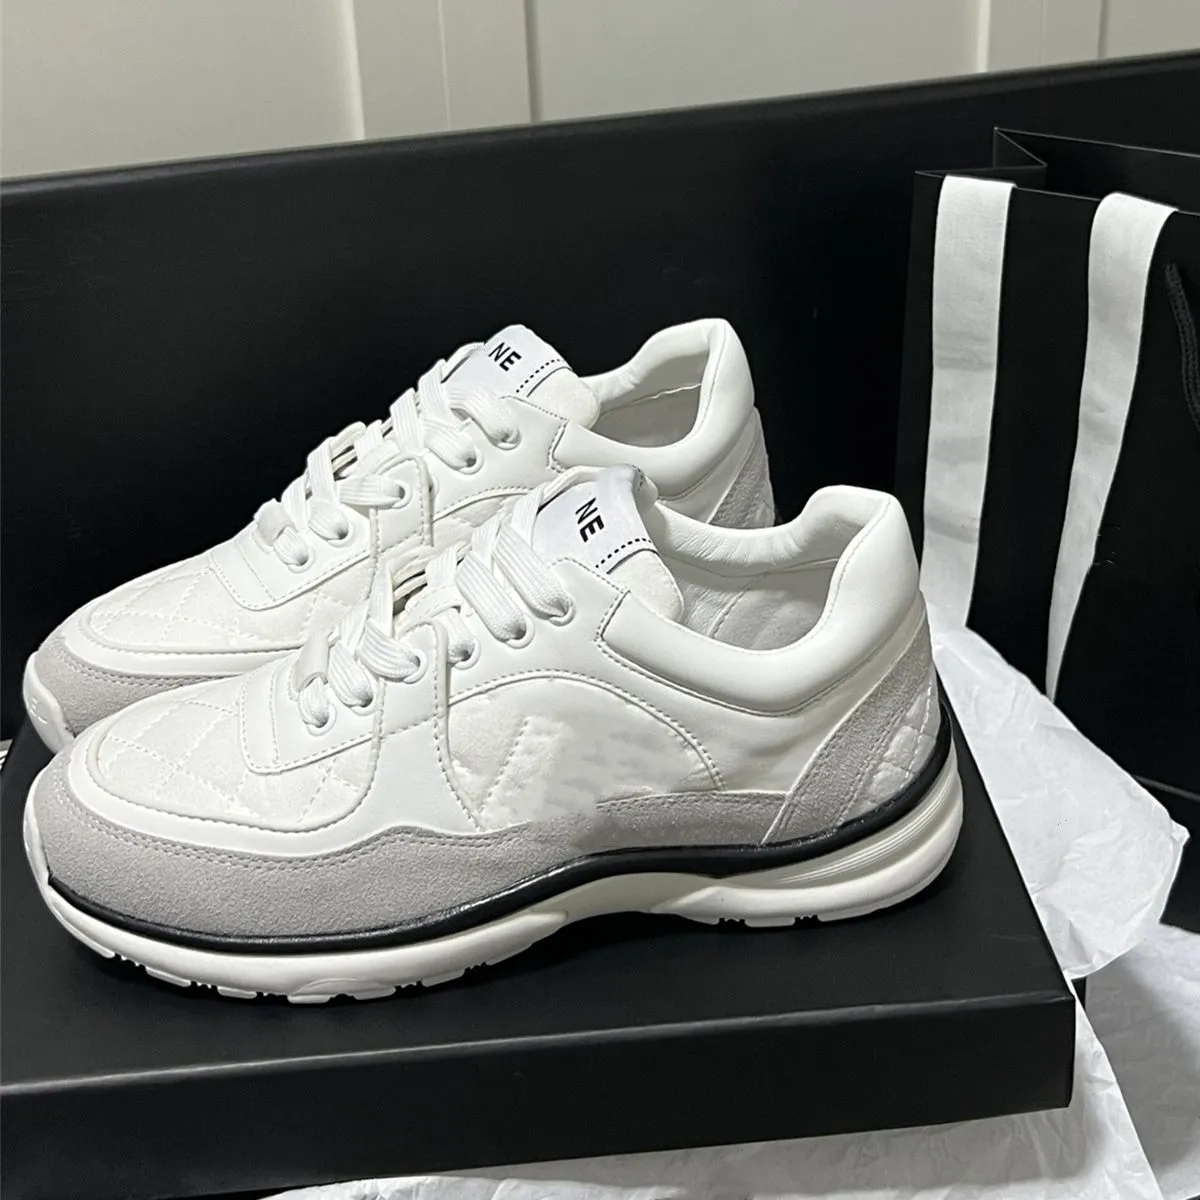 2024 New Designer Running Shoes chanelshoes brand channel Sneakers Womens Luxury lace-up Casual shoes Classic Trainer Sdfsf Fabric Suede Effect City gsfs size 35-45